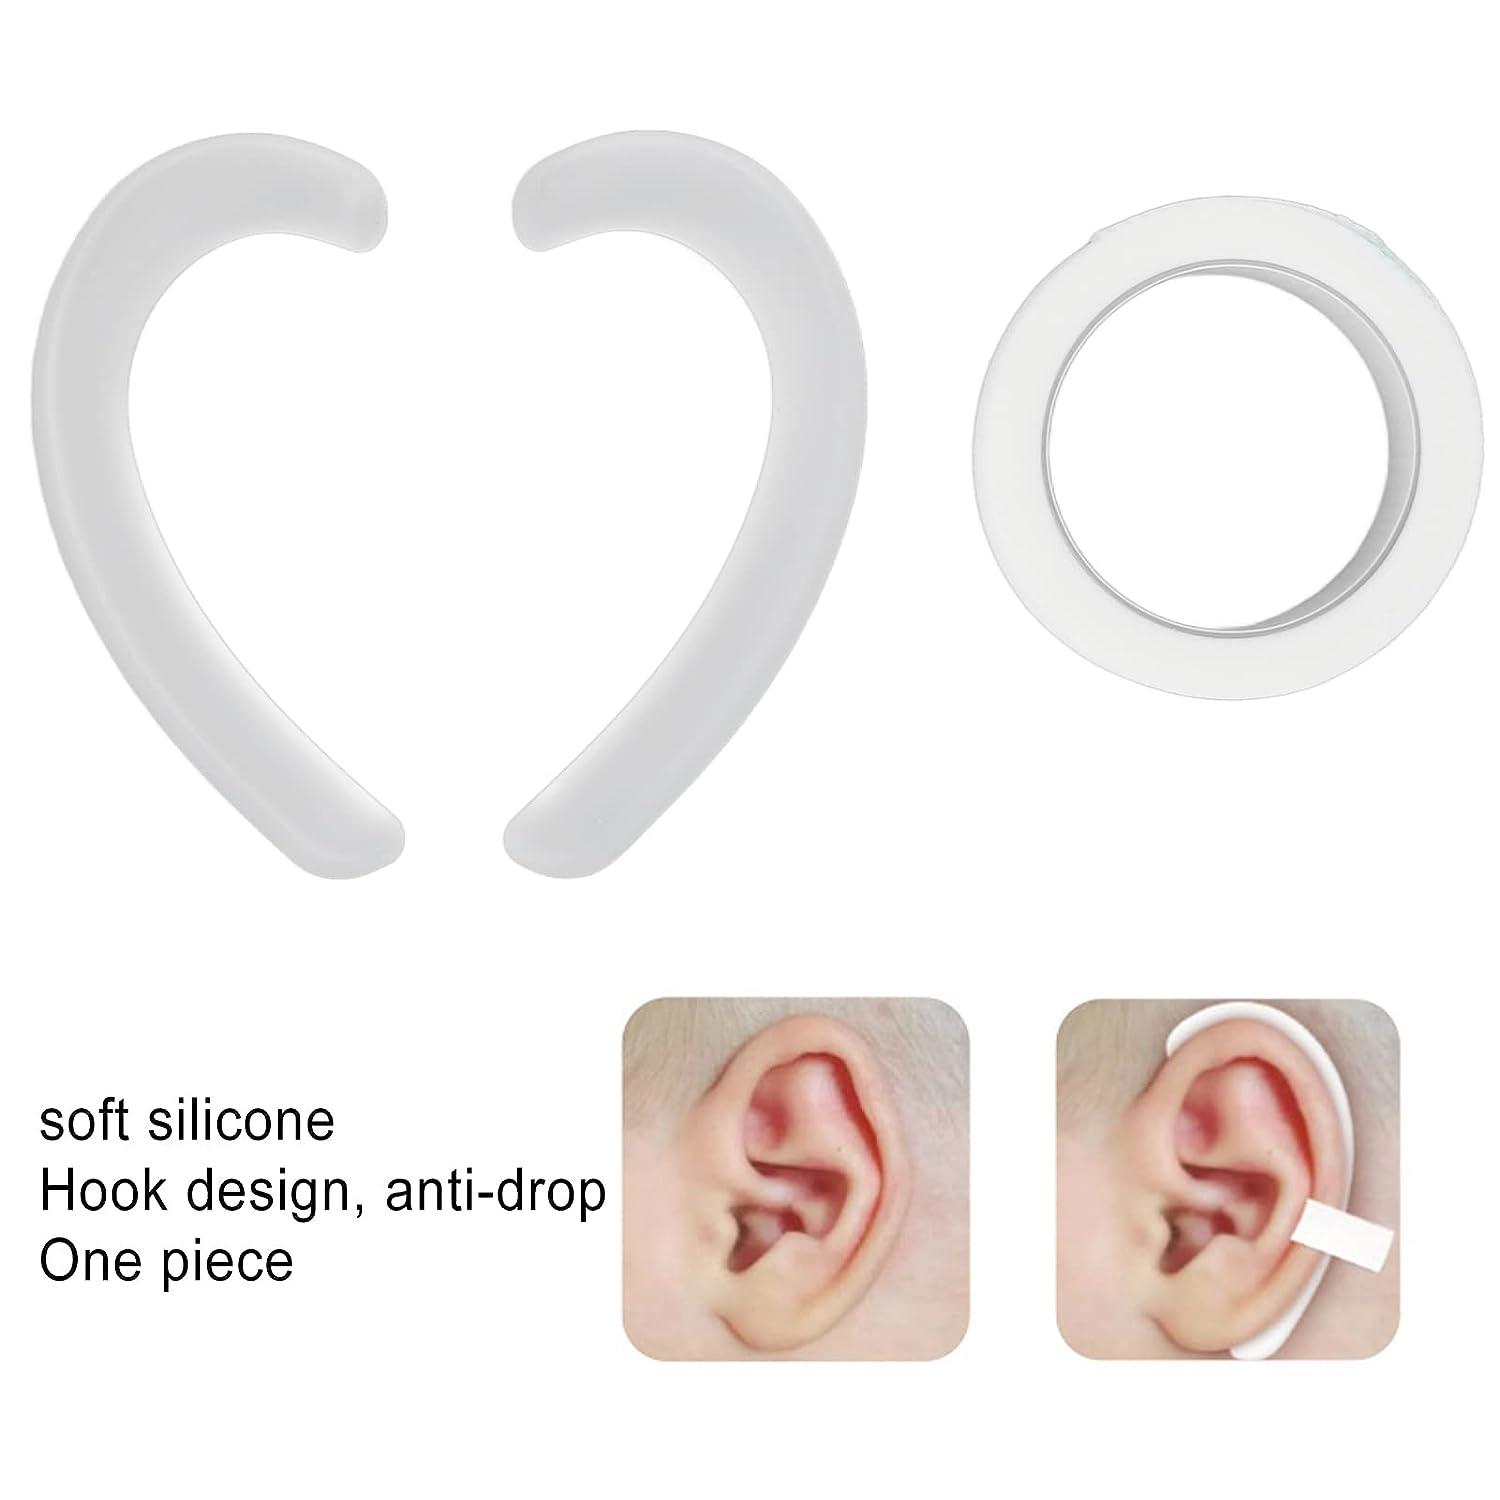 Ear Corrector Correct Deformed Protruding Tape Prominent Ears with  Waterproof and Aesthetic Stickers Fixation Pinning Solution Orthopedic Baby  Items Without Surgery for Newborn Infant Baby